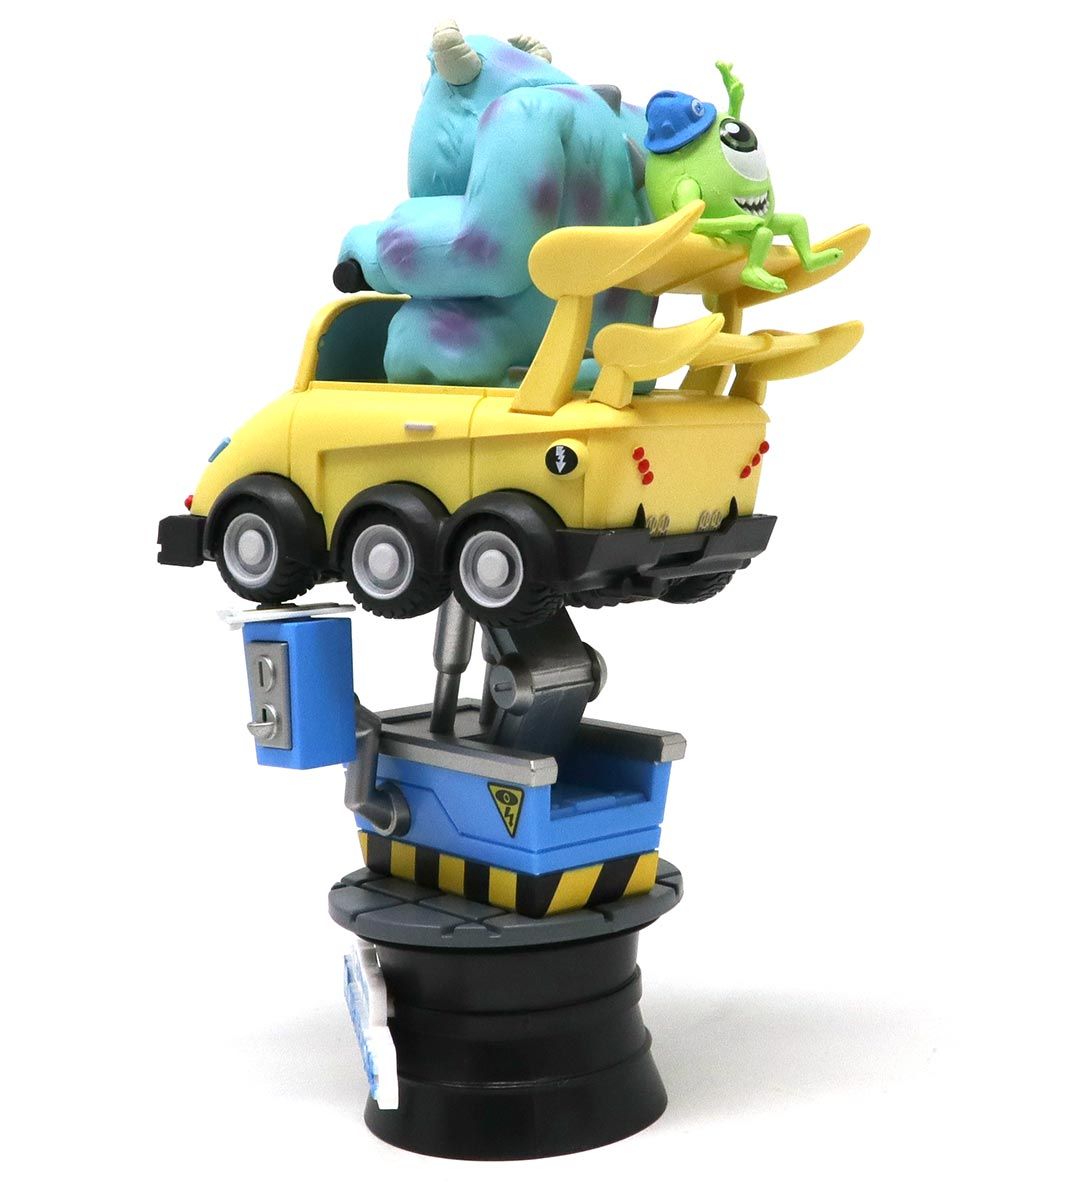 Disney Coin Ride Series - Monsters Inc.